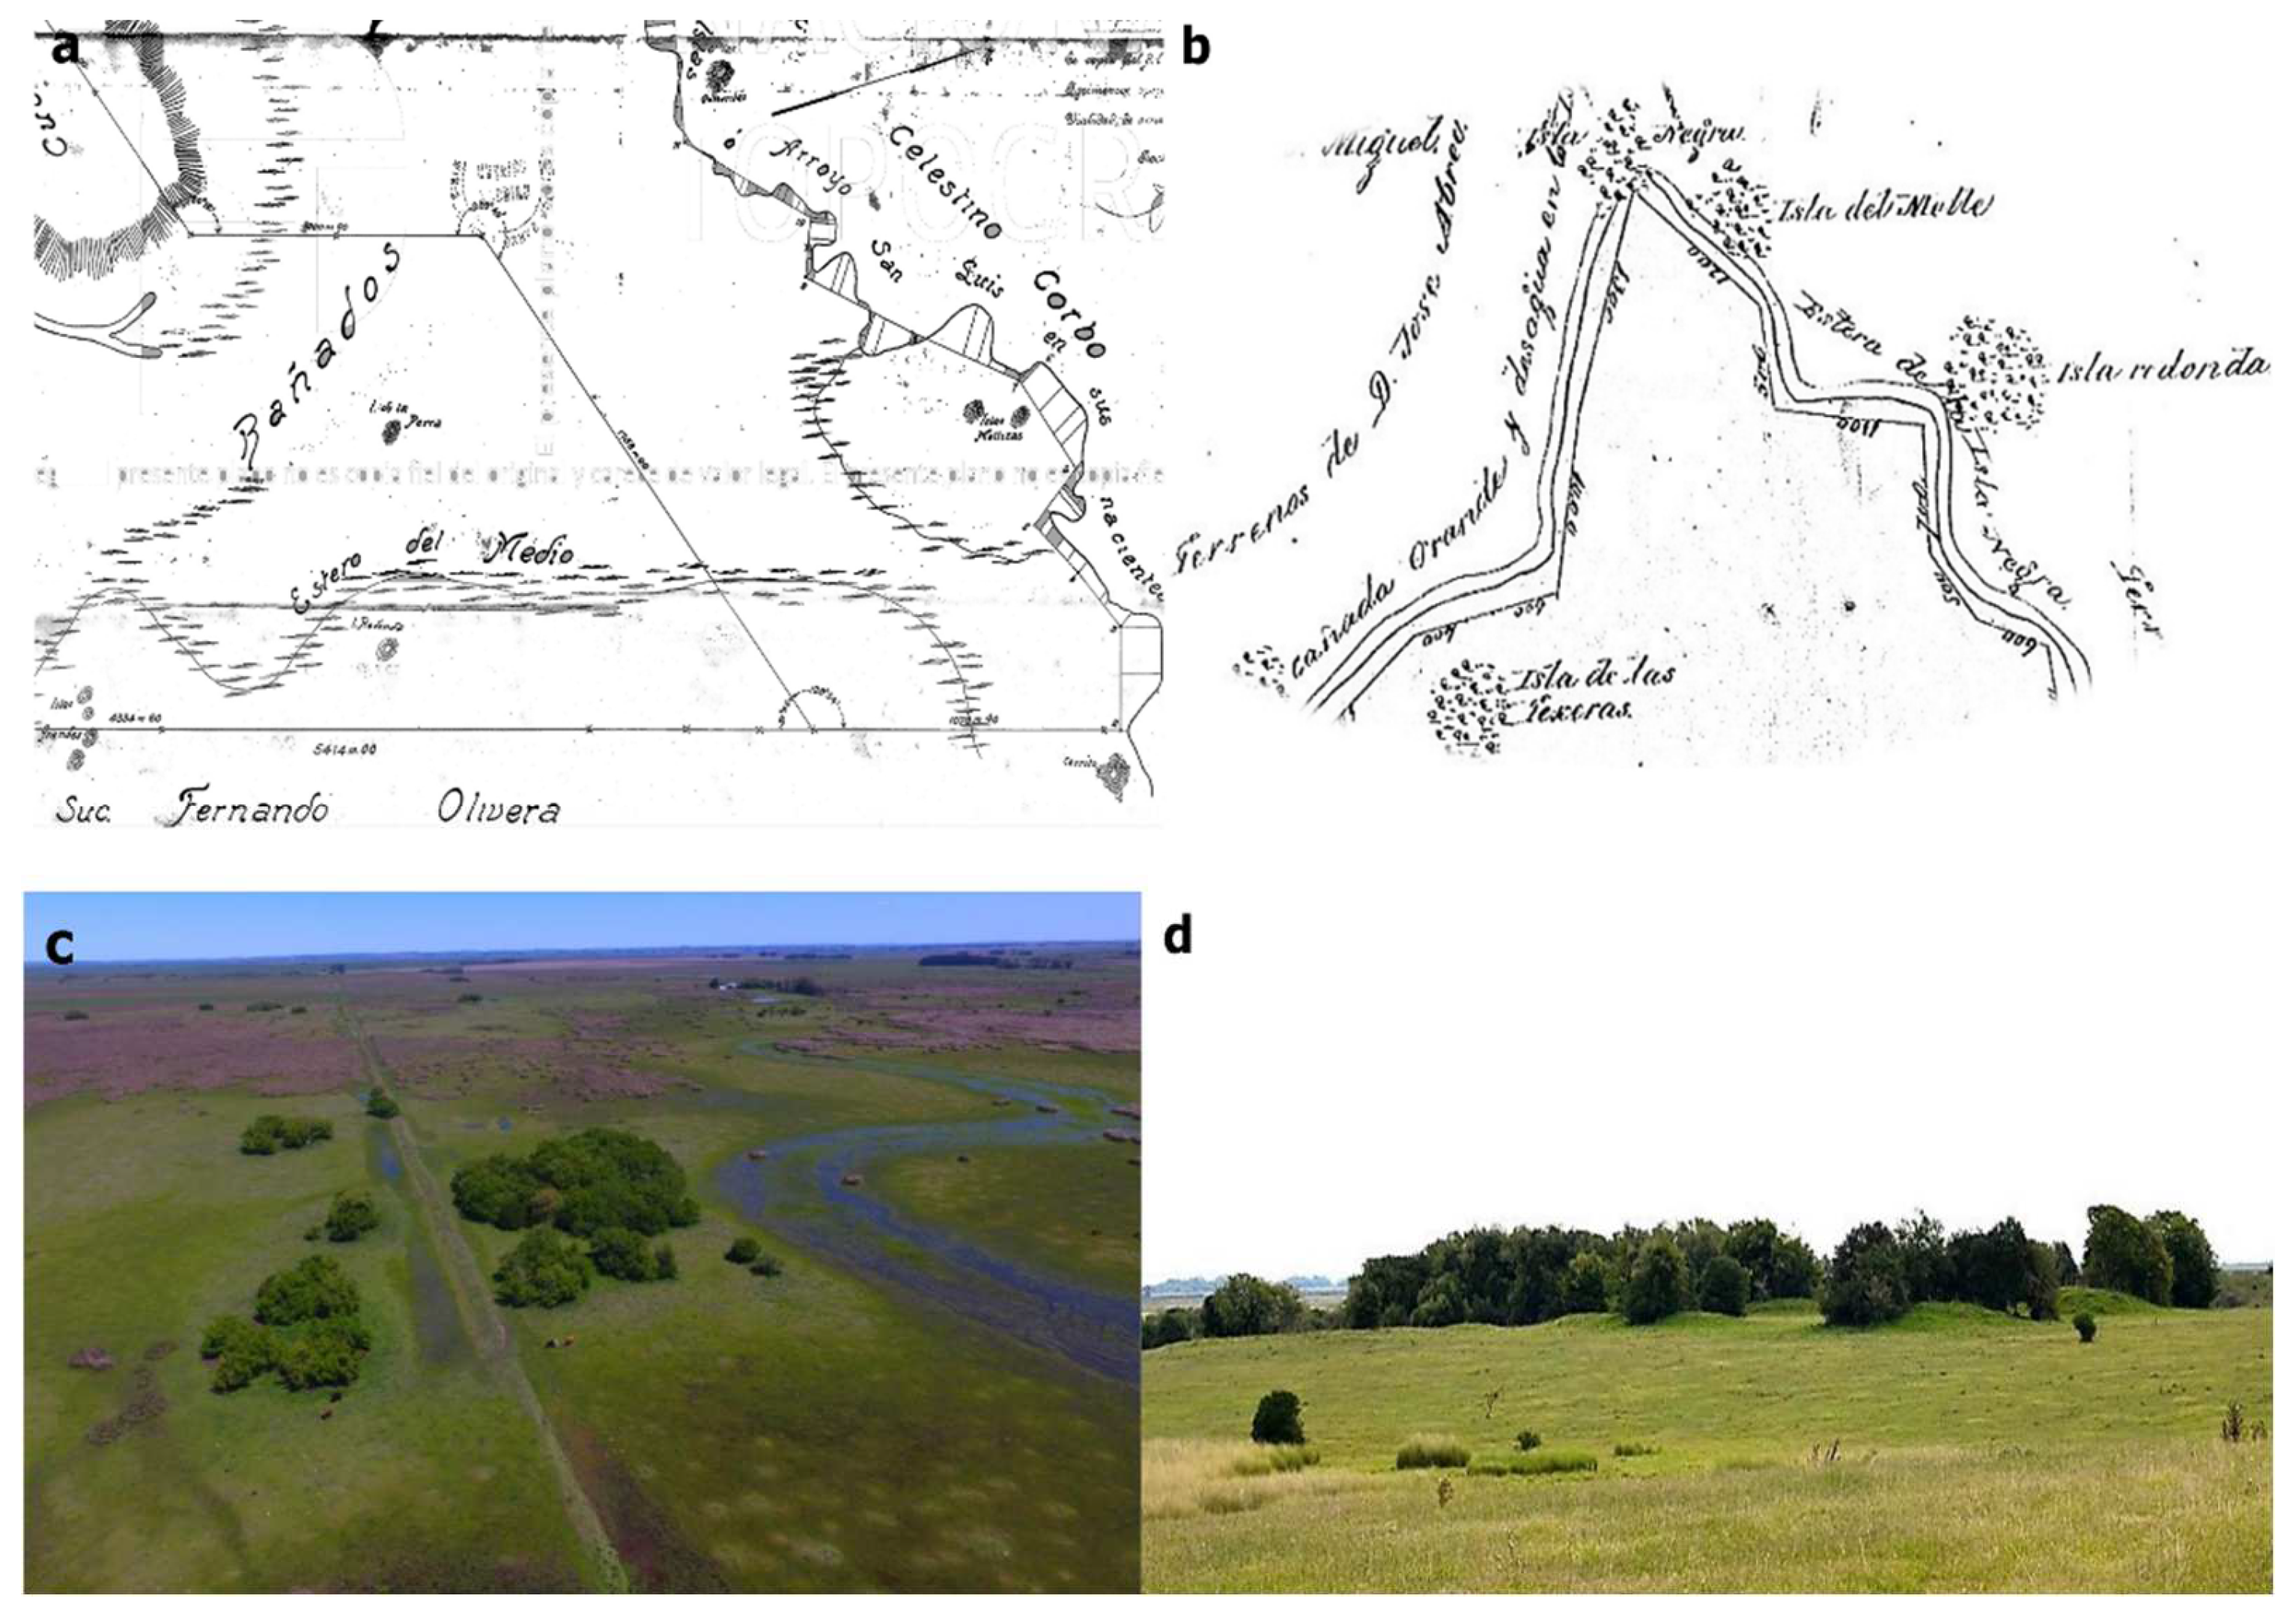 Land | Free Full-Text | From Mounds to Villages: The Social Construction of  the Landscape during the Middle and Late Holocene in the India Muerta  Lowlands, Uruguay